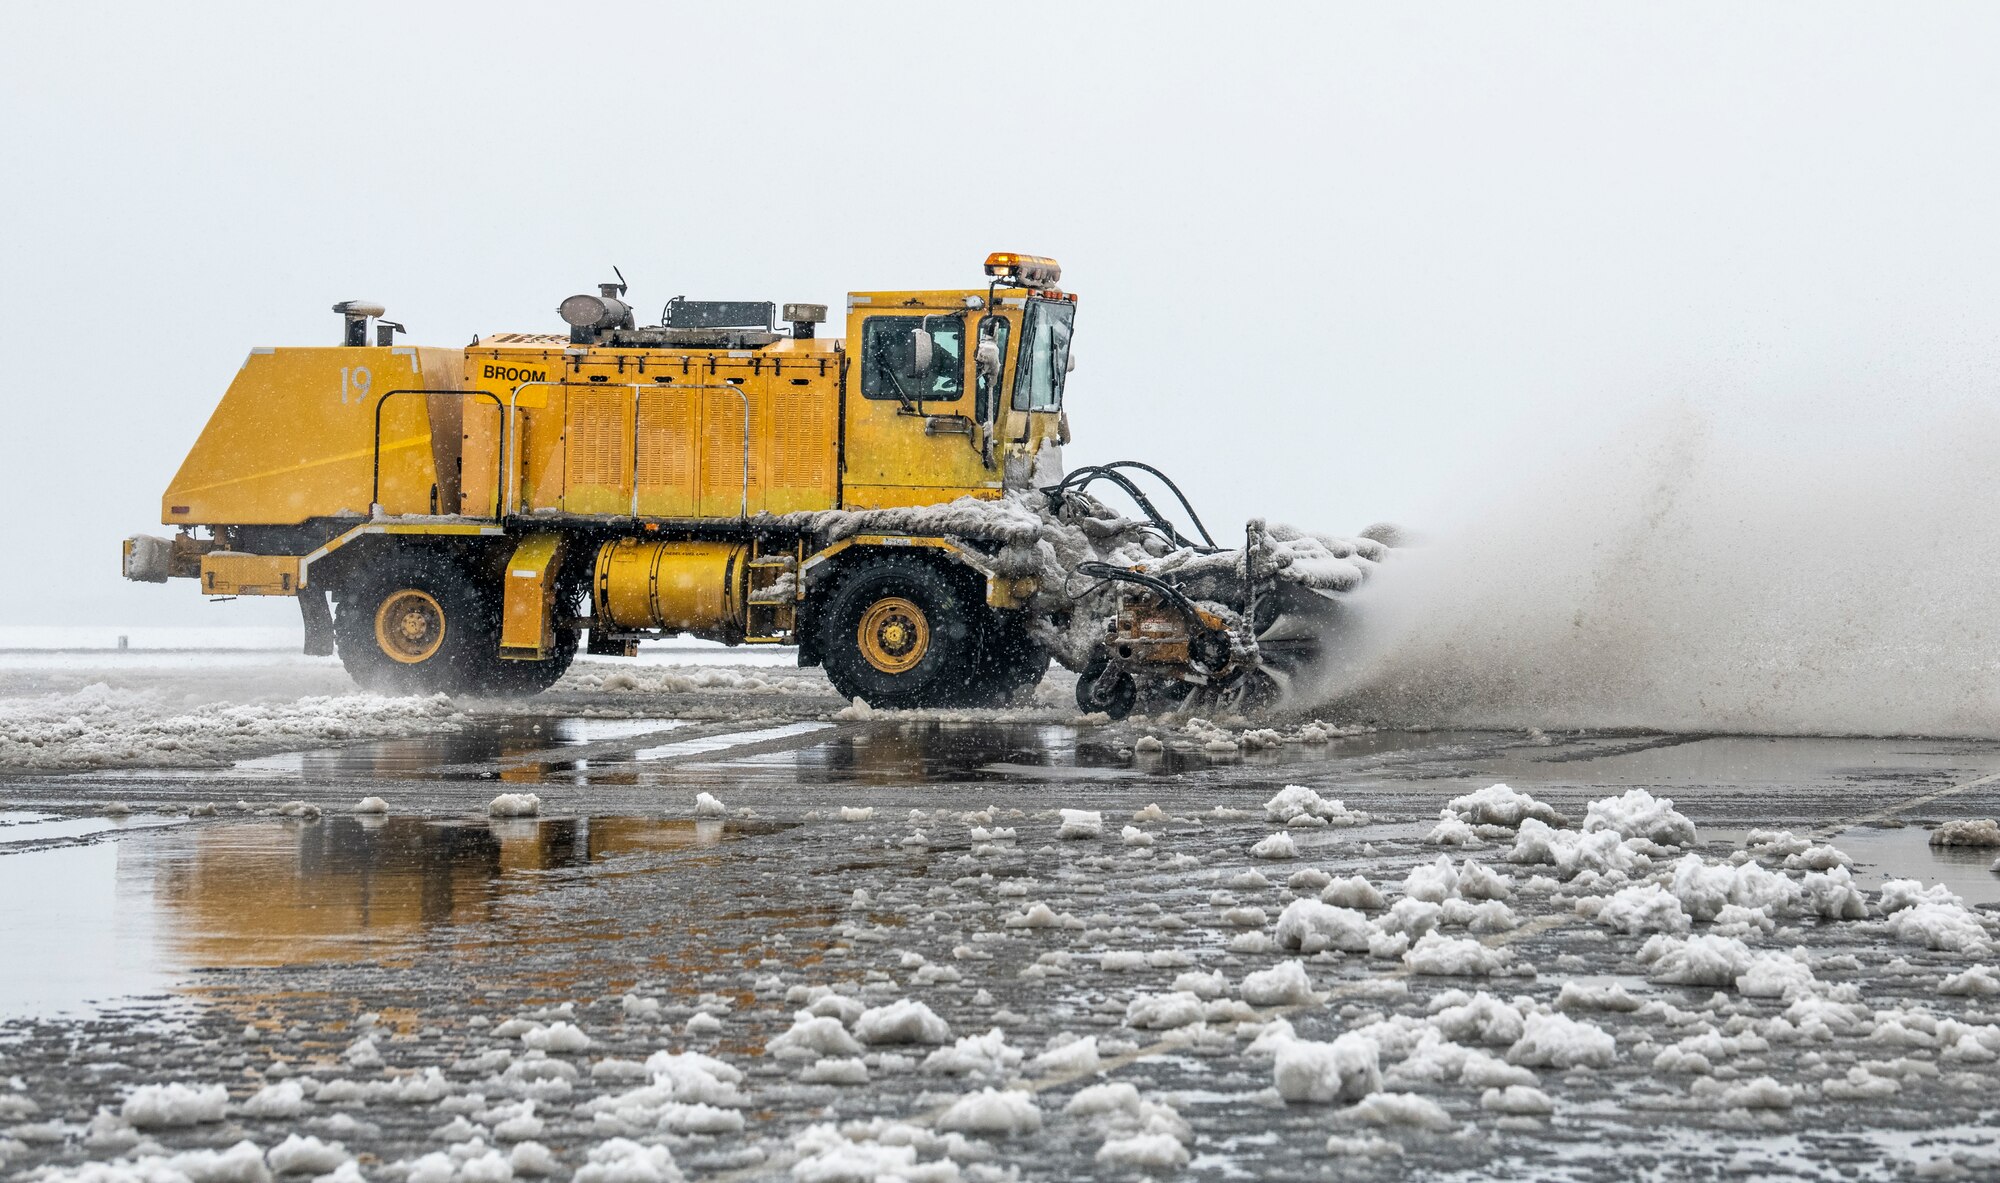 A 436th Civil Engineer Squadron runway sweeper clears snow from the flight line at Dover Air Force Base, Delaware, Feb. 11, 2021. As snow fell, the base continued normal operations and prepared for additional snowfall. (U.S. Air Force photo by Senior Airman Christopher Quail)